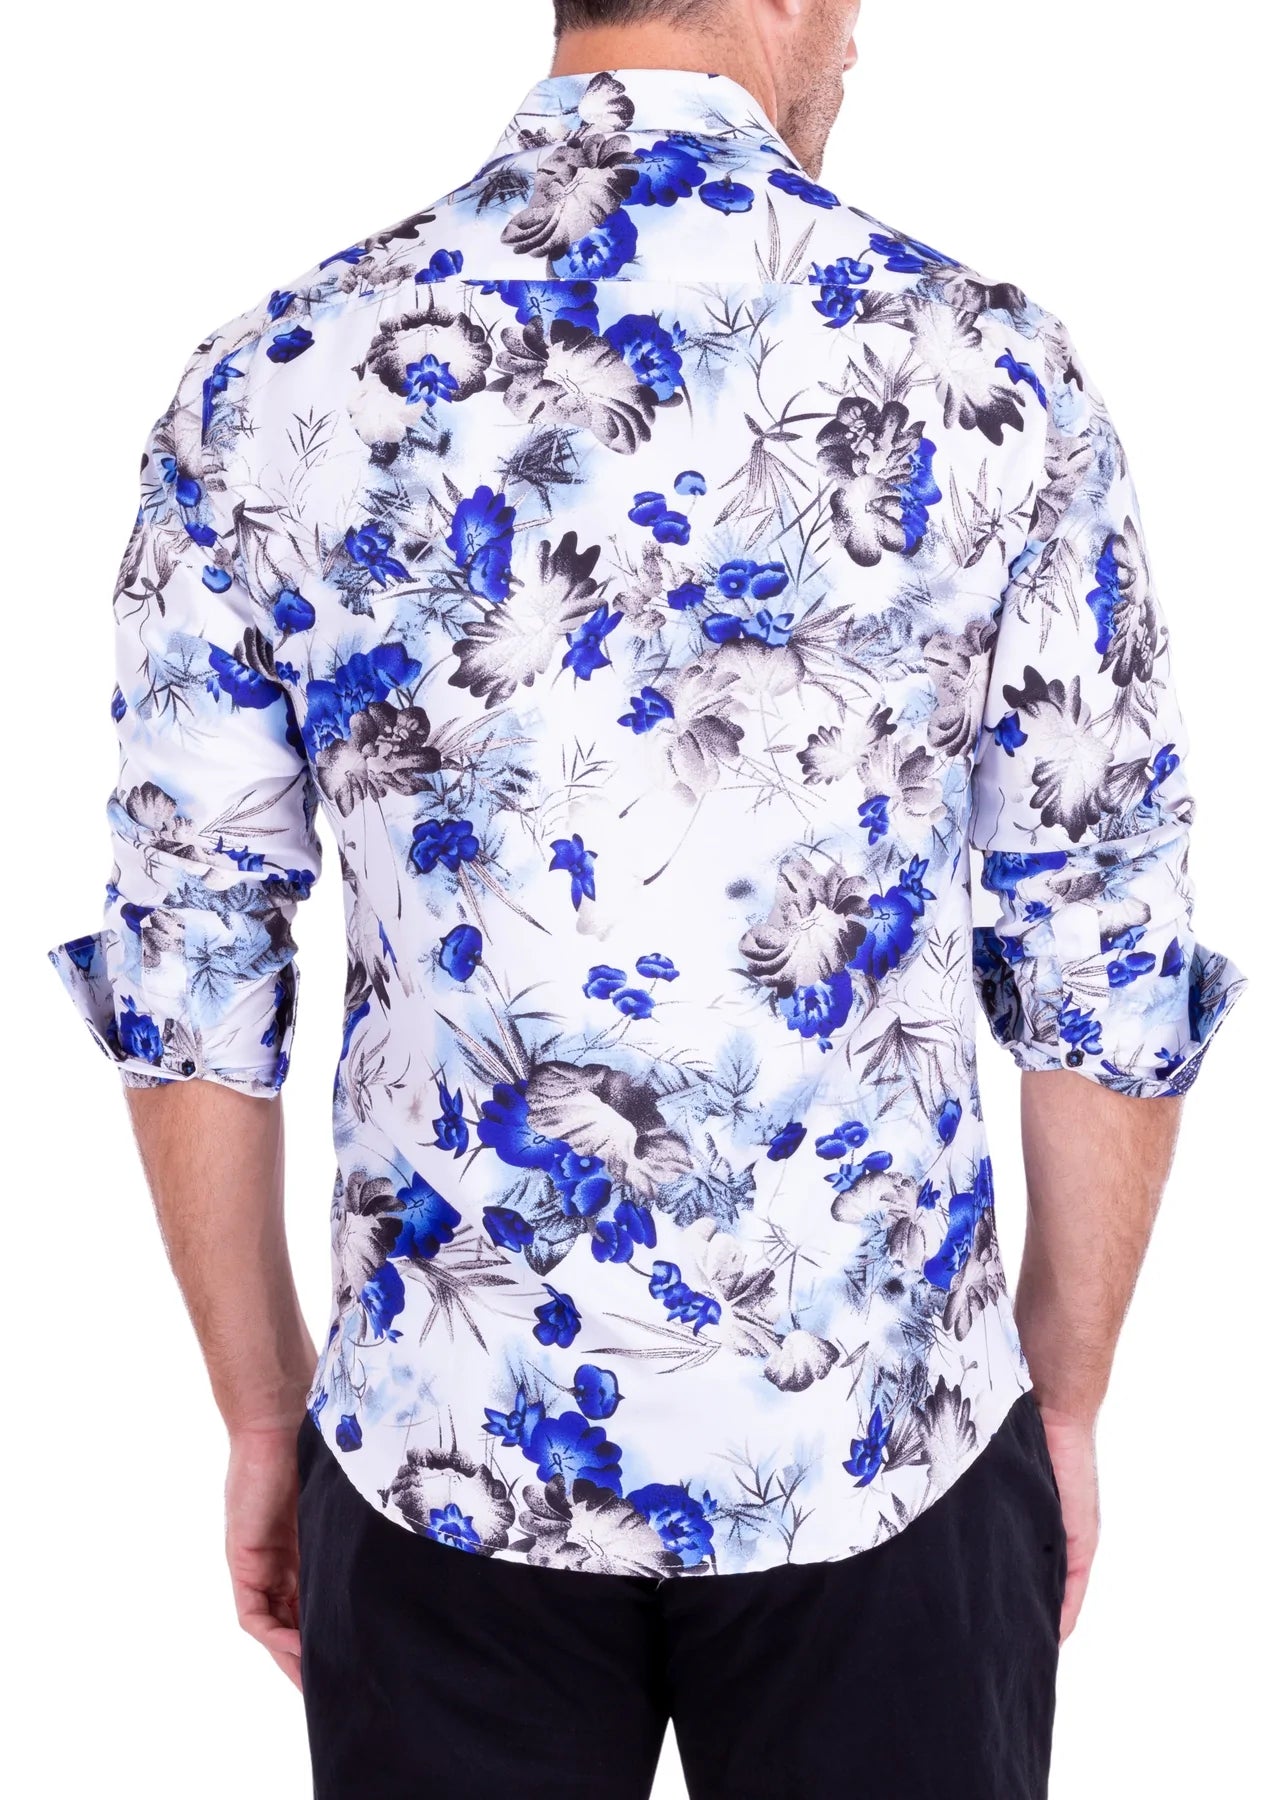 Blue Floral Long Sleeve Button Down